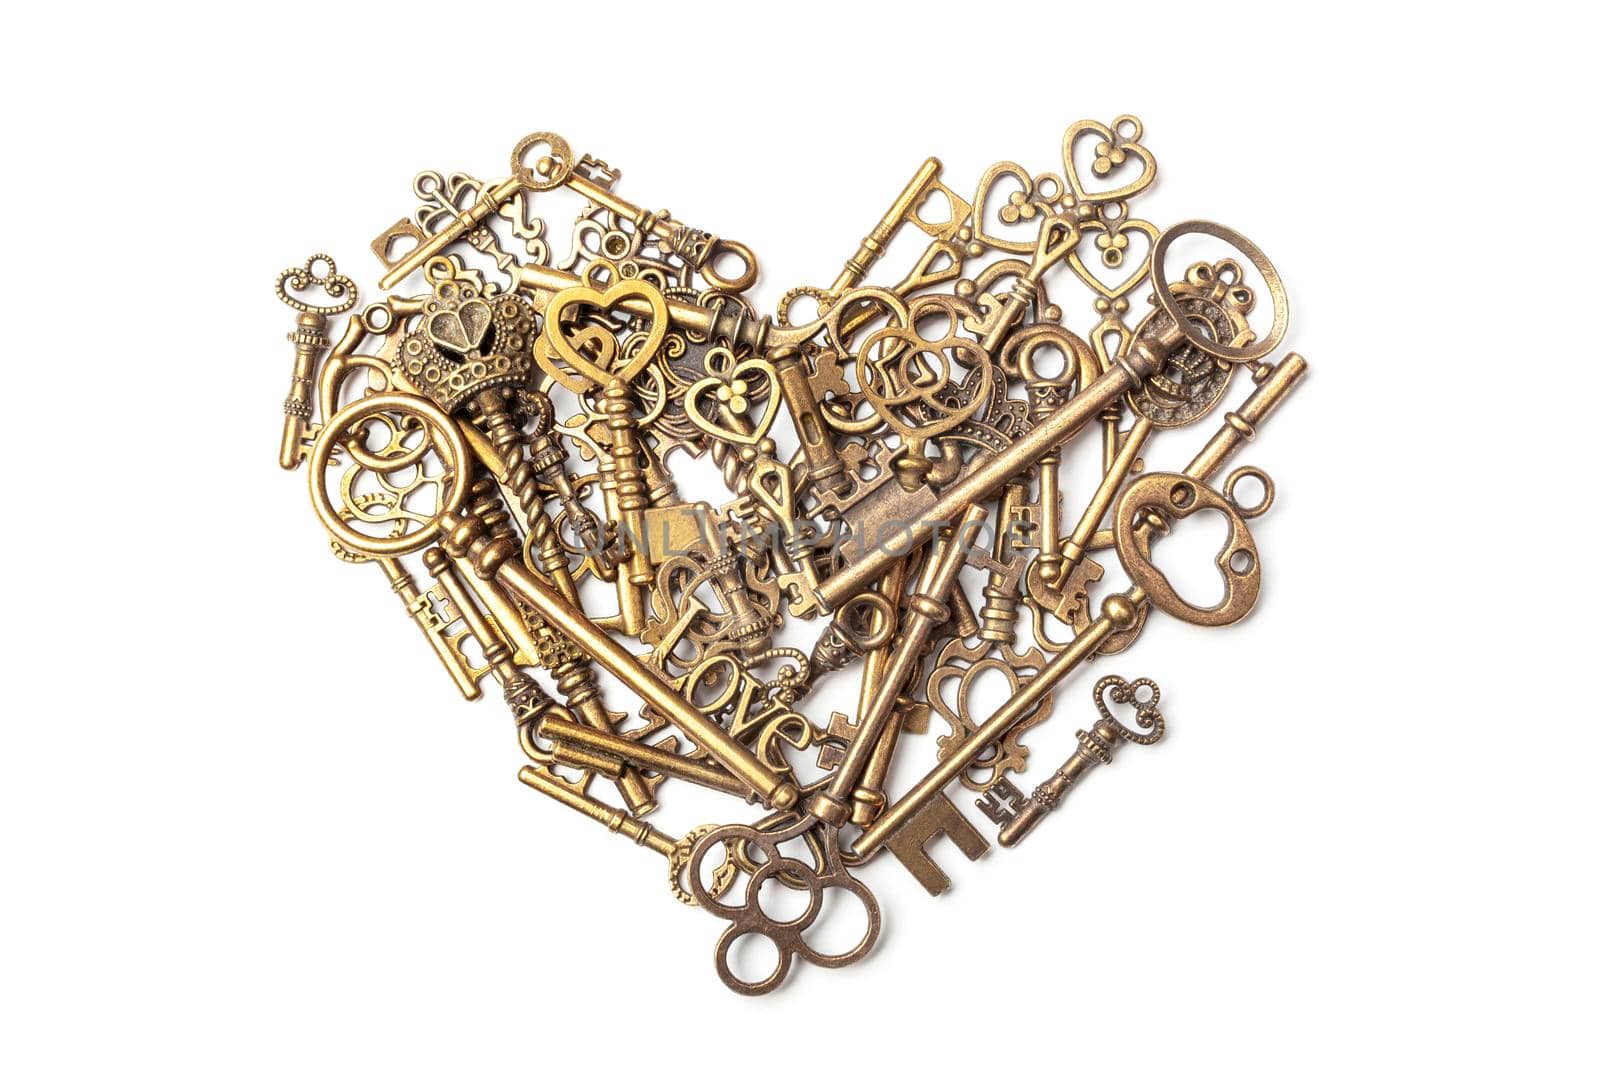 Old, vintage keys in the shape of a heart by SlayCer